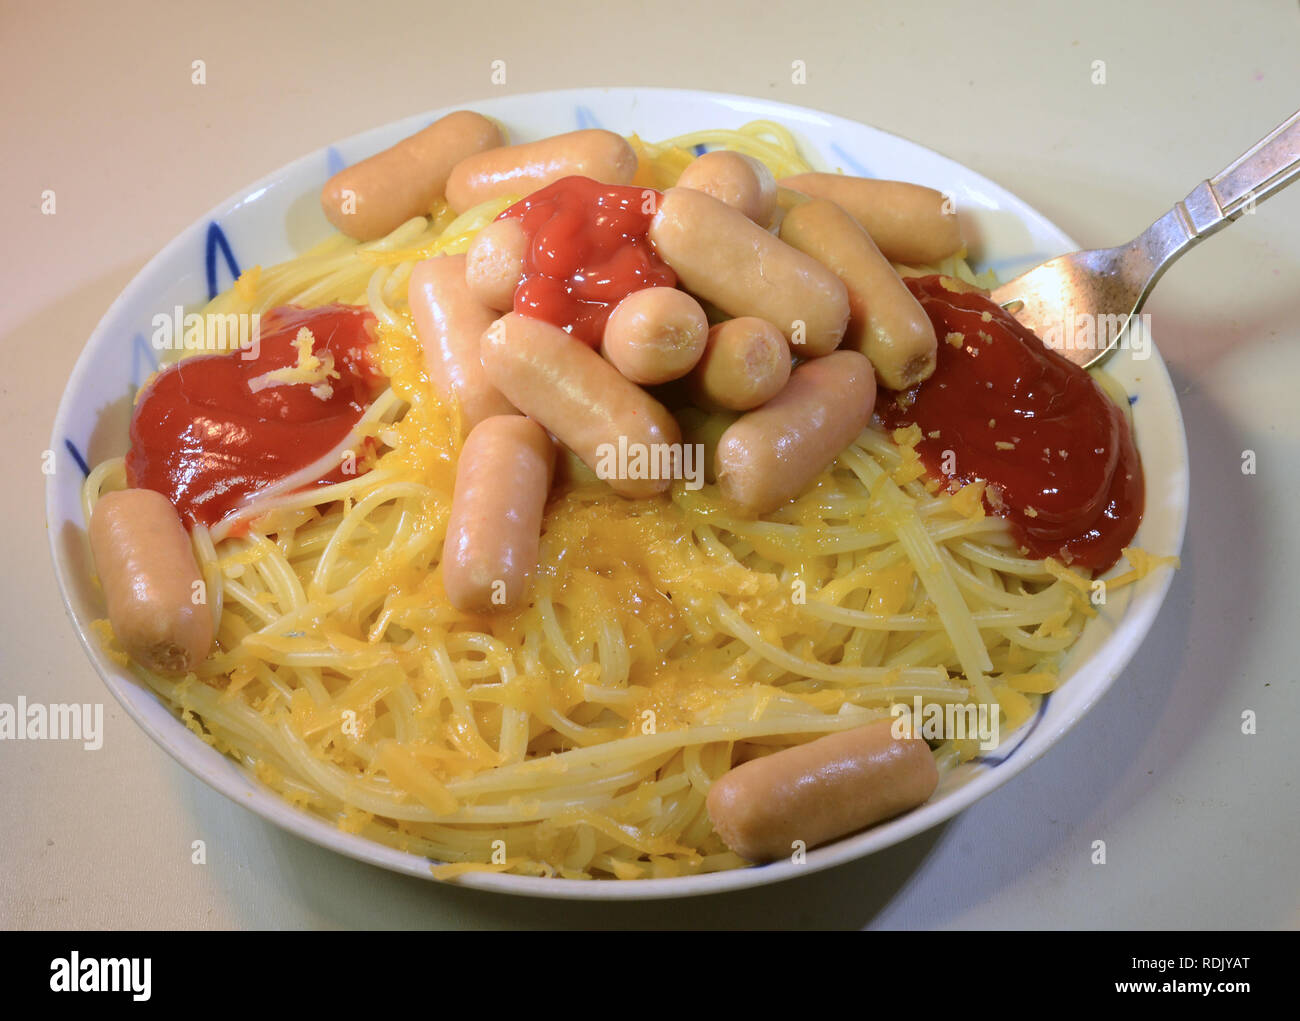 Plate with spaghetti, ketchup shaved cheese and cocktail sausages. Stock Photo